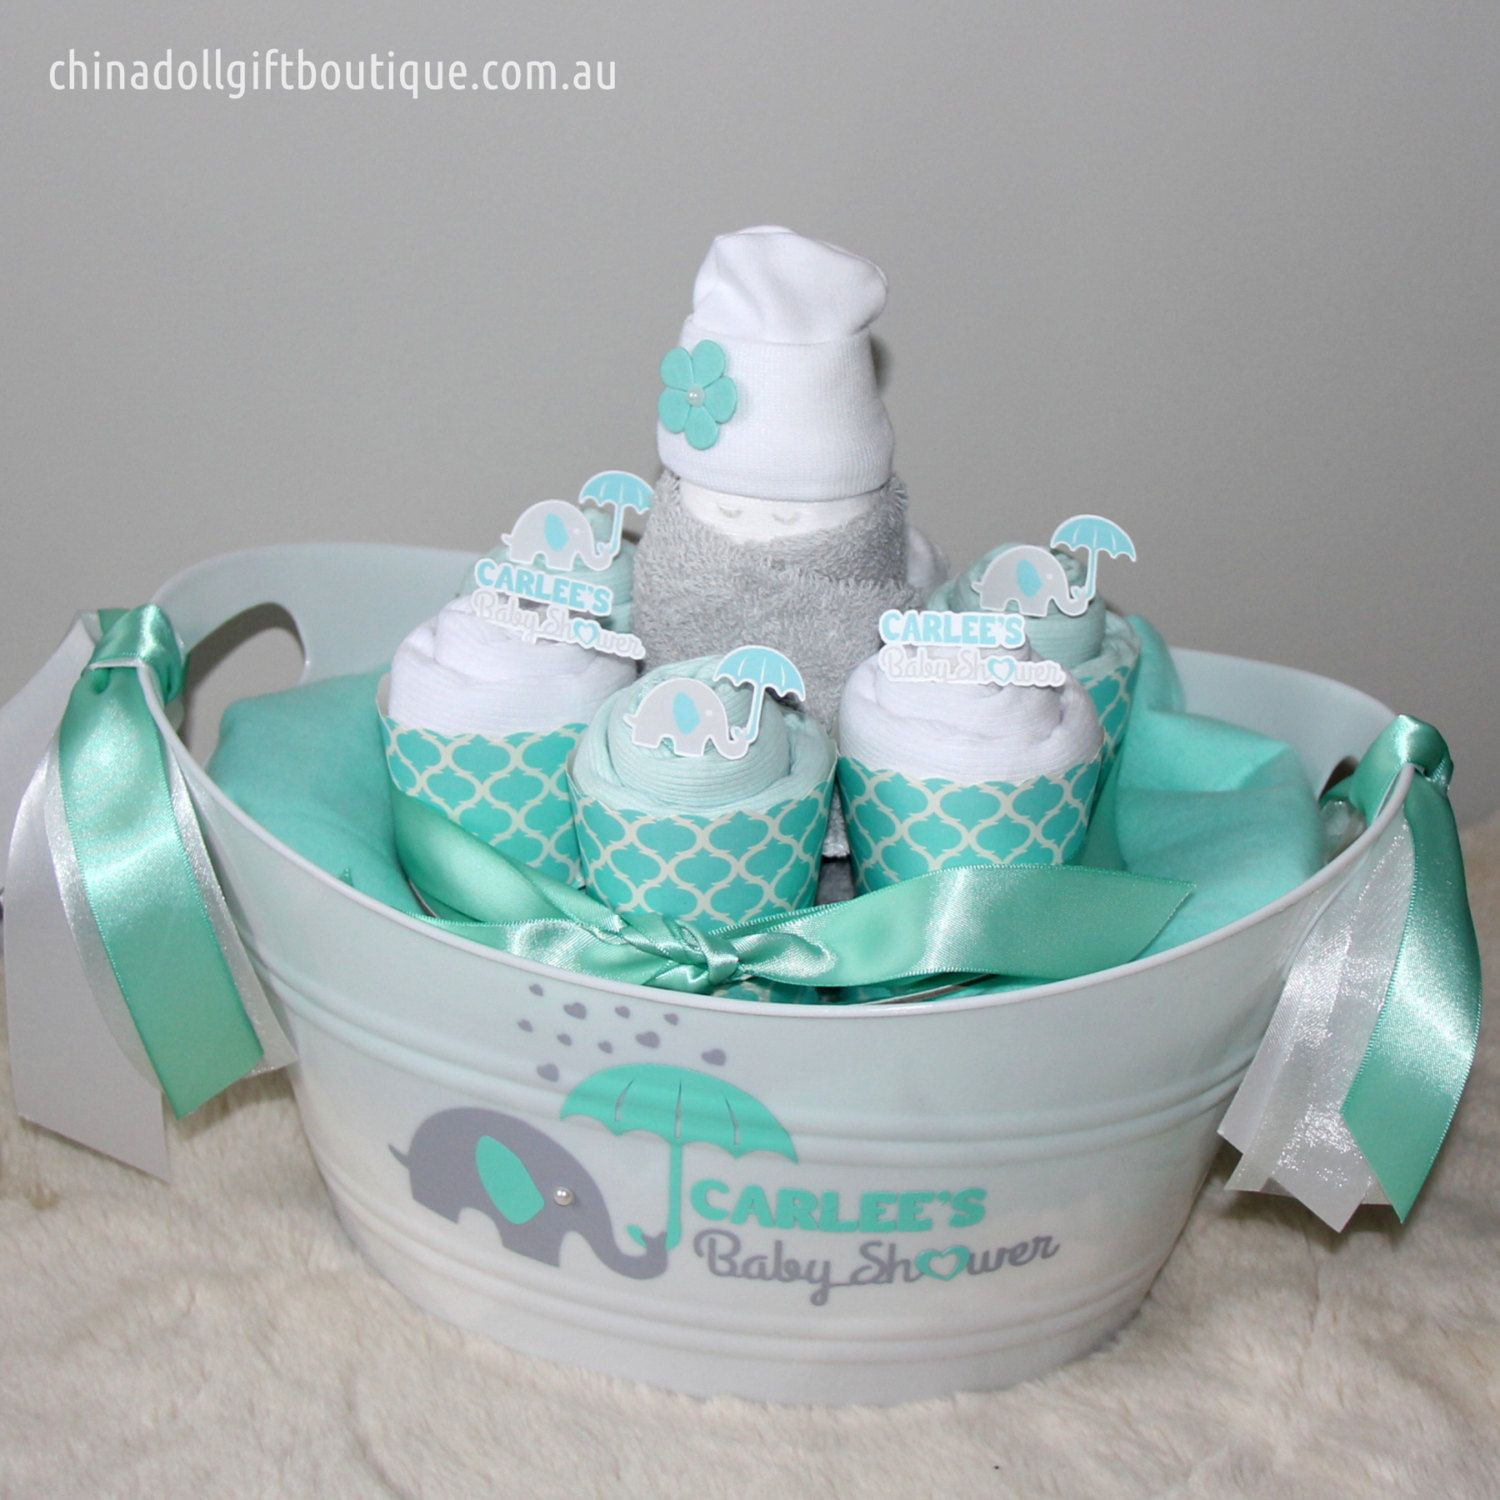 Baby Shower Gift Ideas For A Boy
 baby shower t basket small personalised